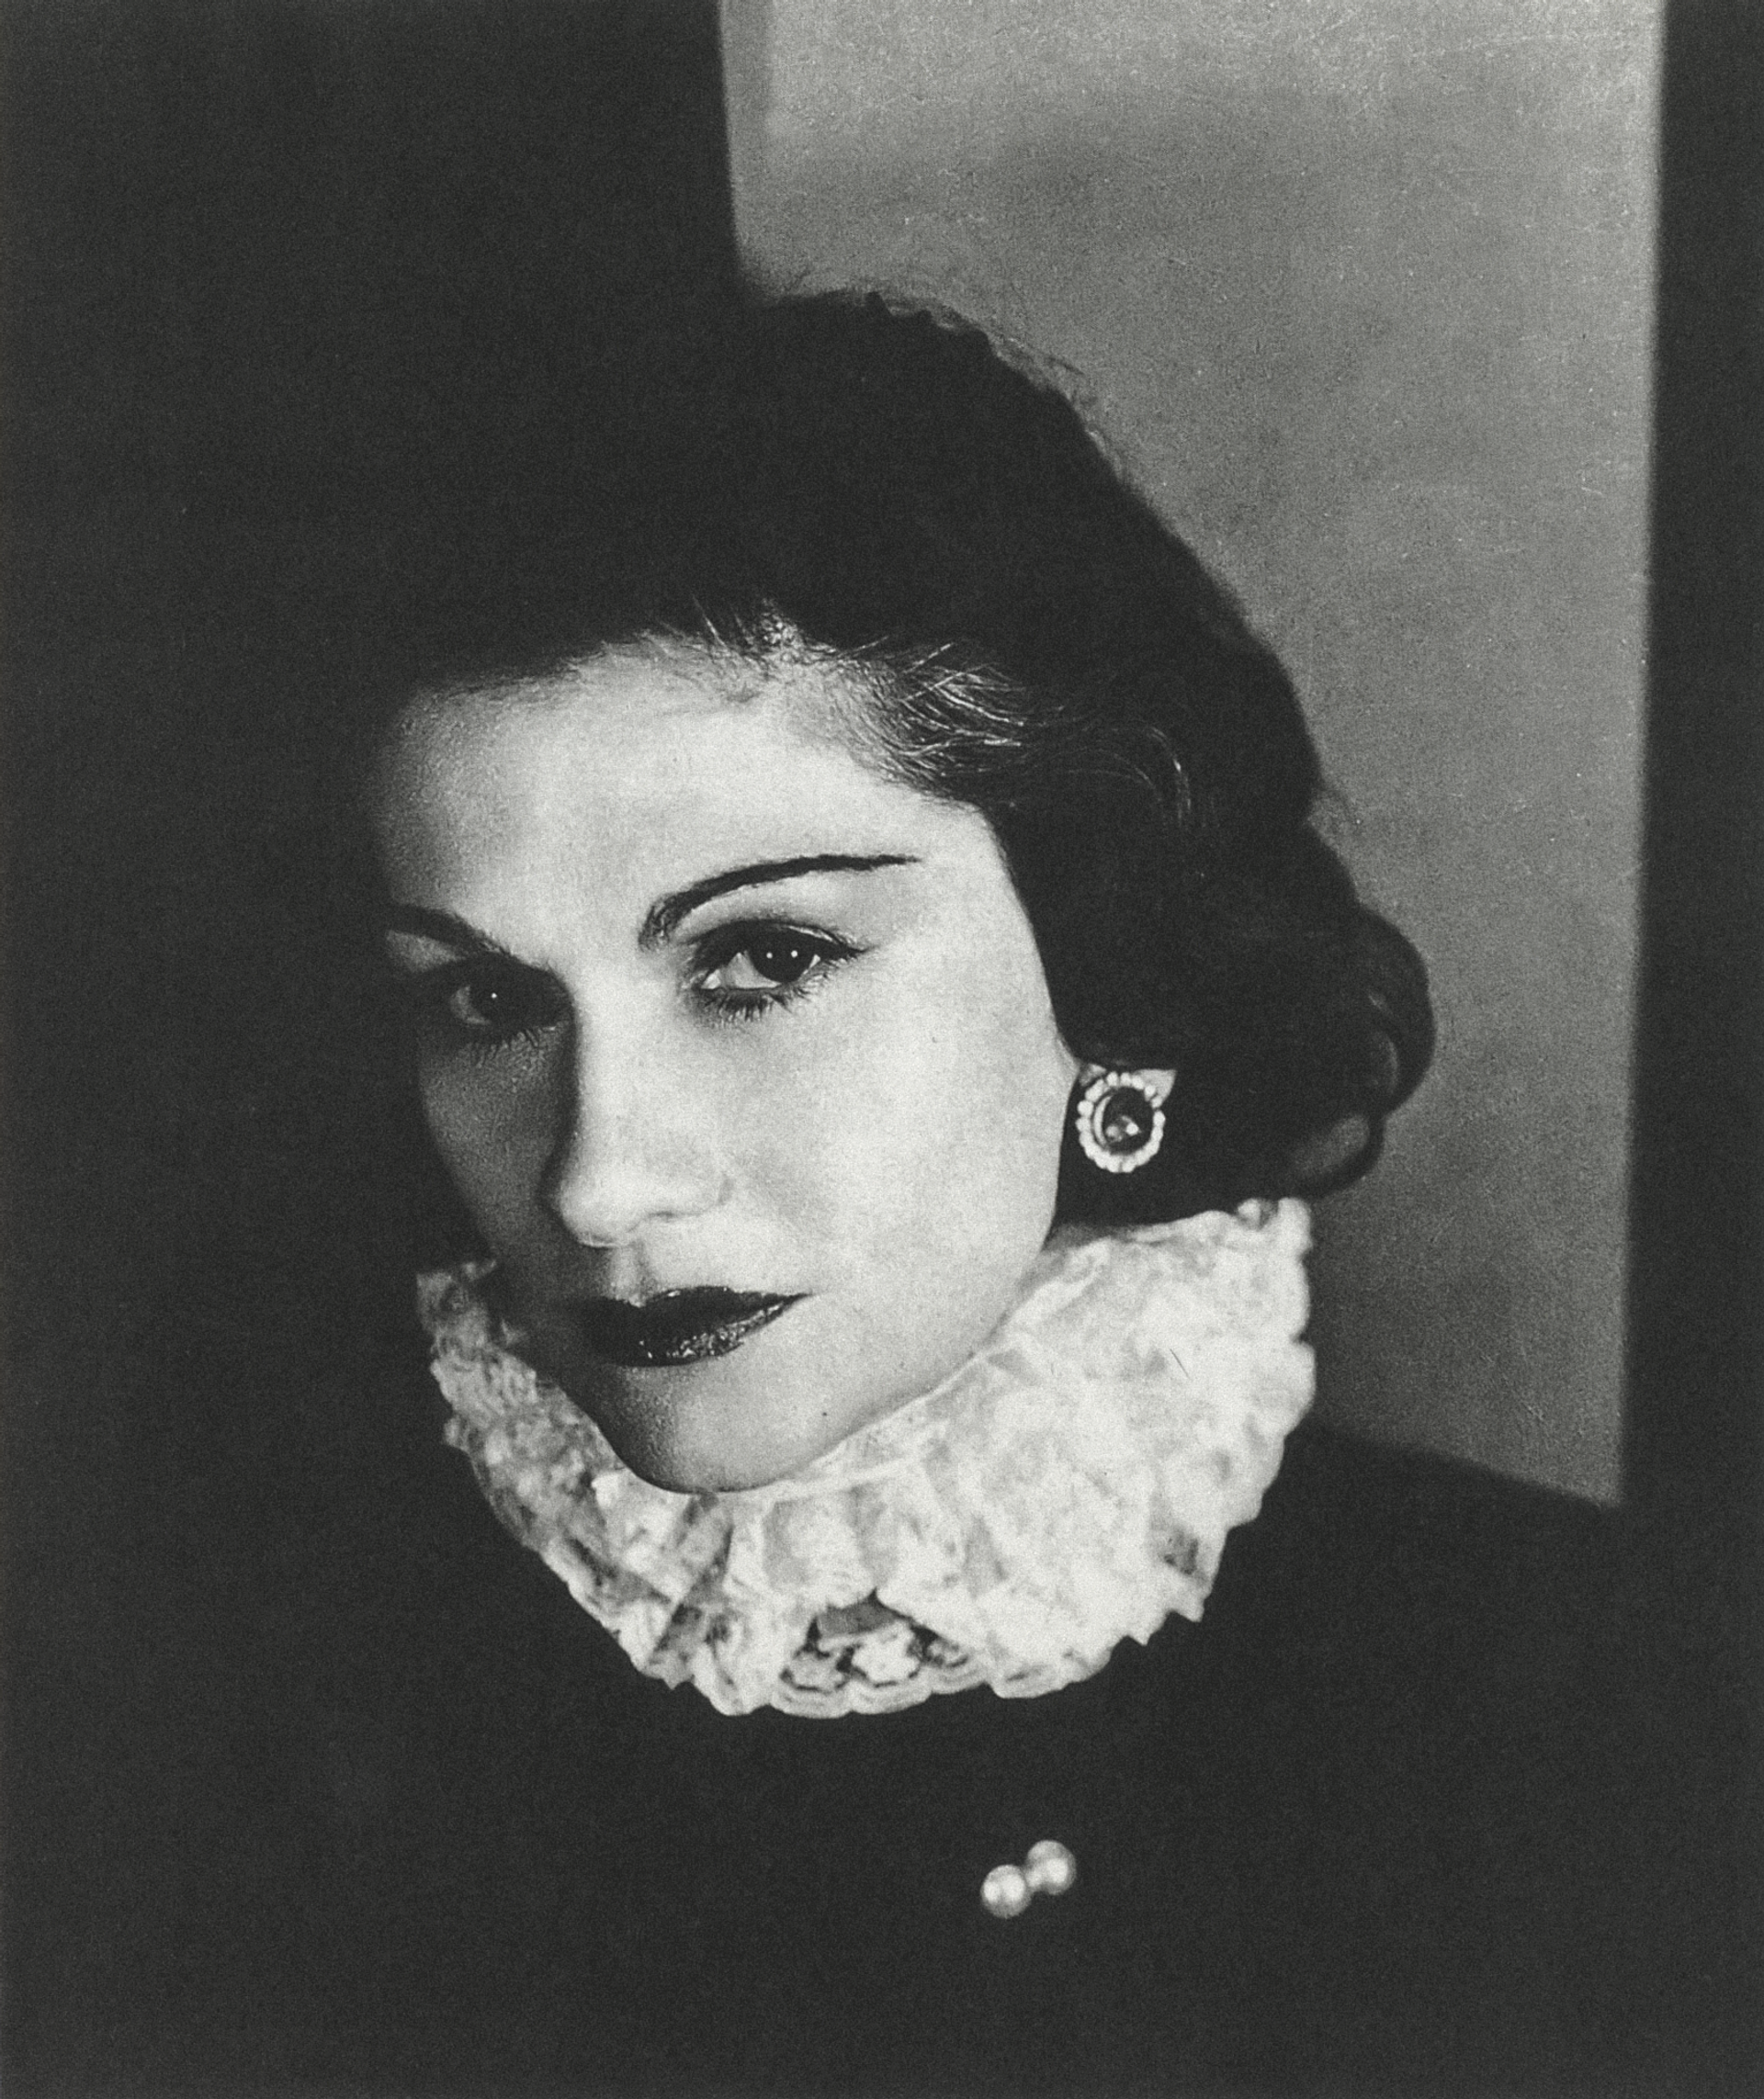 In 1944, Chanel was interrogated by the Free French Purge Committee. After her release, she said to her grandniece, “Churchill had me freed.” Historians have speculated that Churchill was worried Chanel would expose Nazi sympathizers among the highest echelons of British elites – including the royal family. 

Photo: George Hoyningen-Huene, 1939